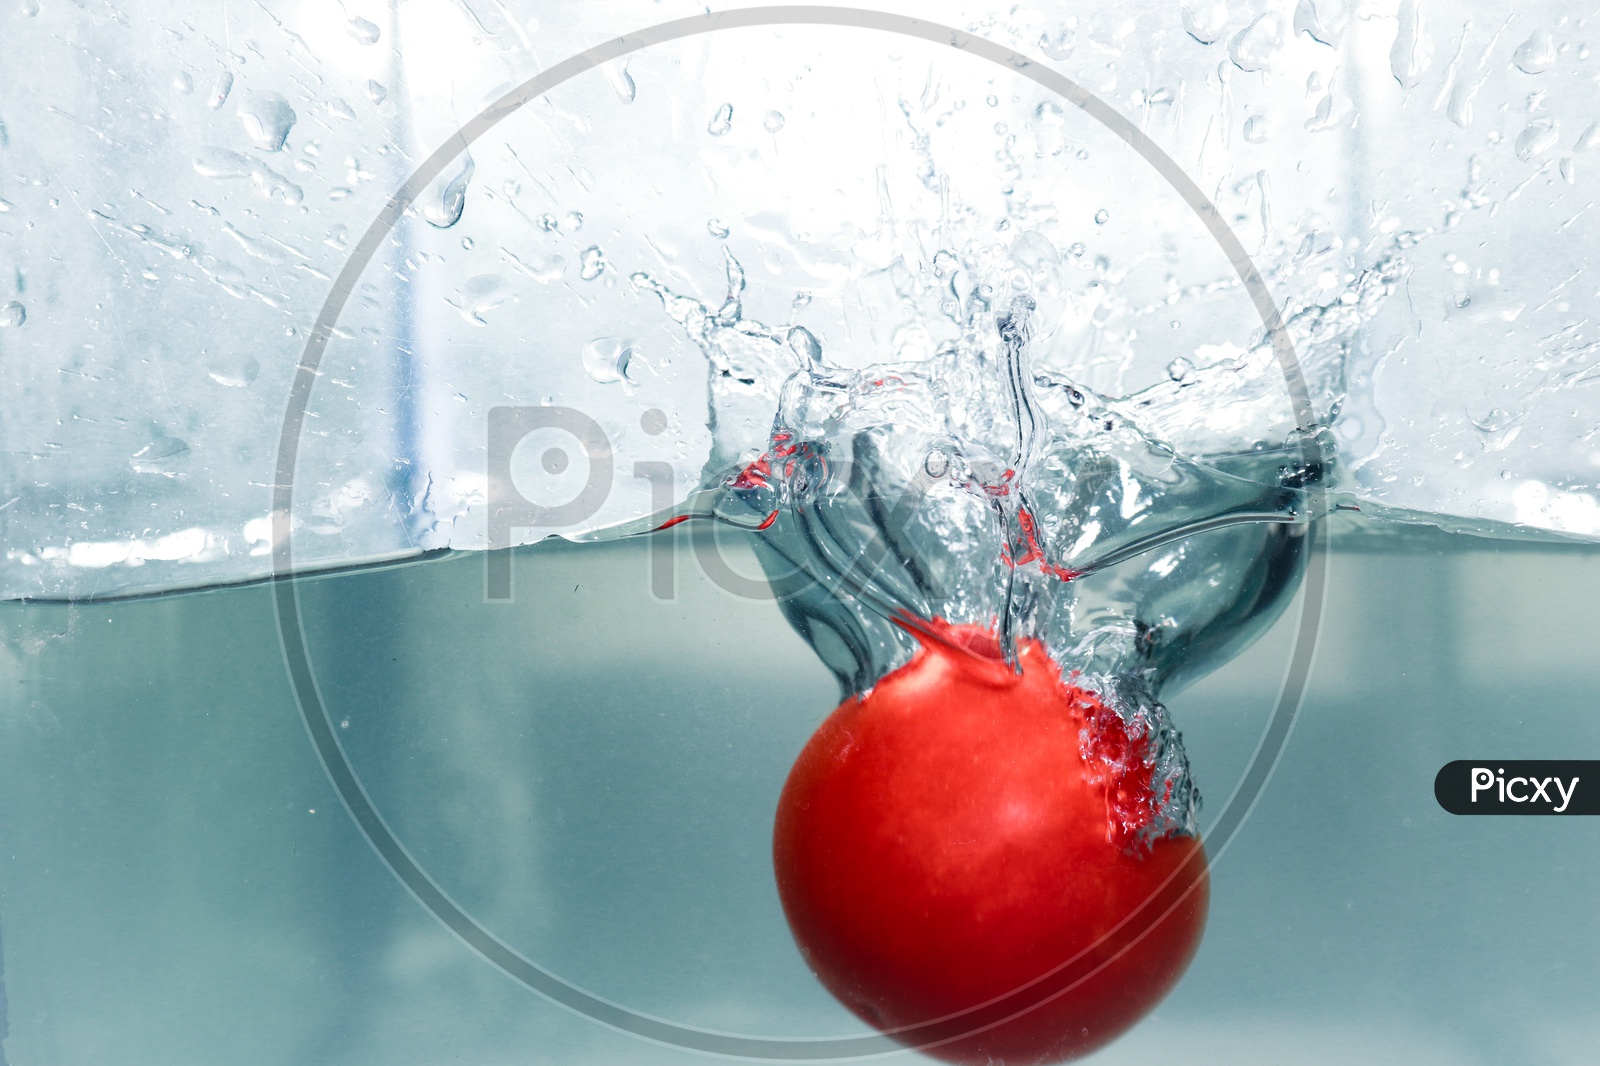 Splash made by dropping a red tomato in clear water